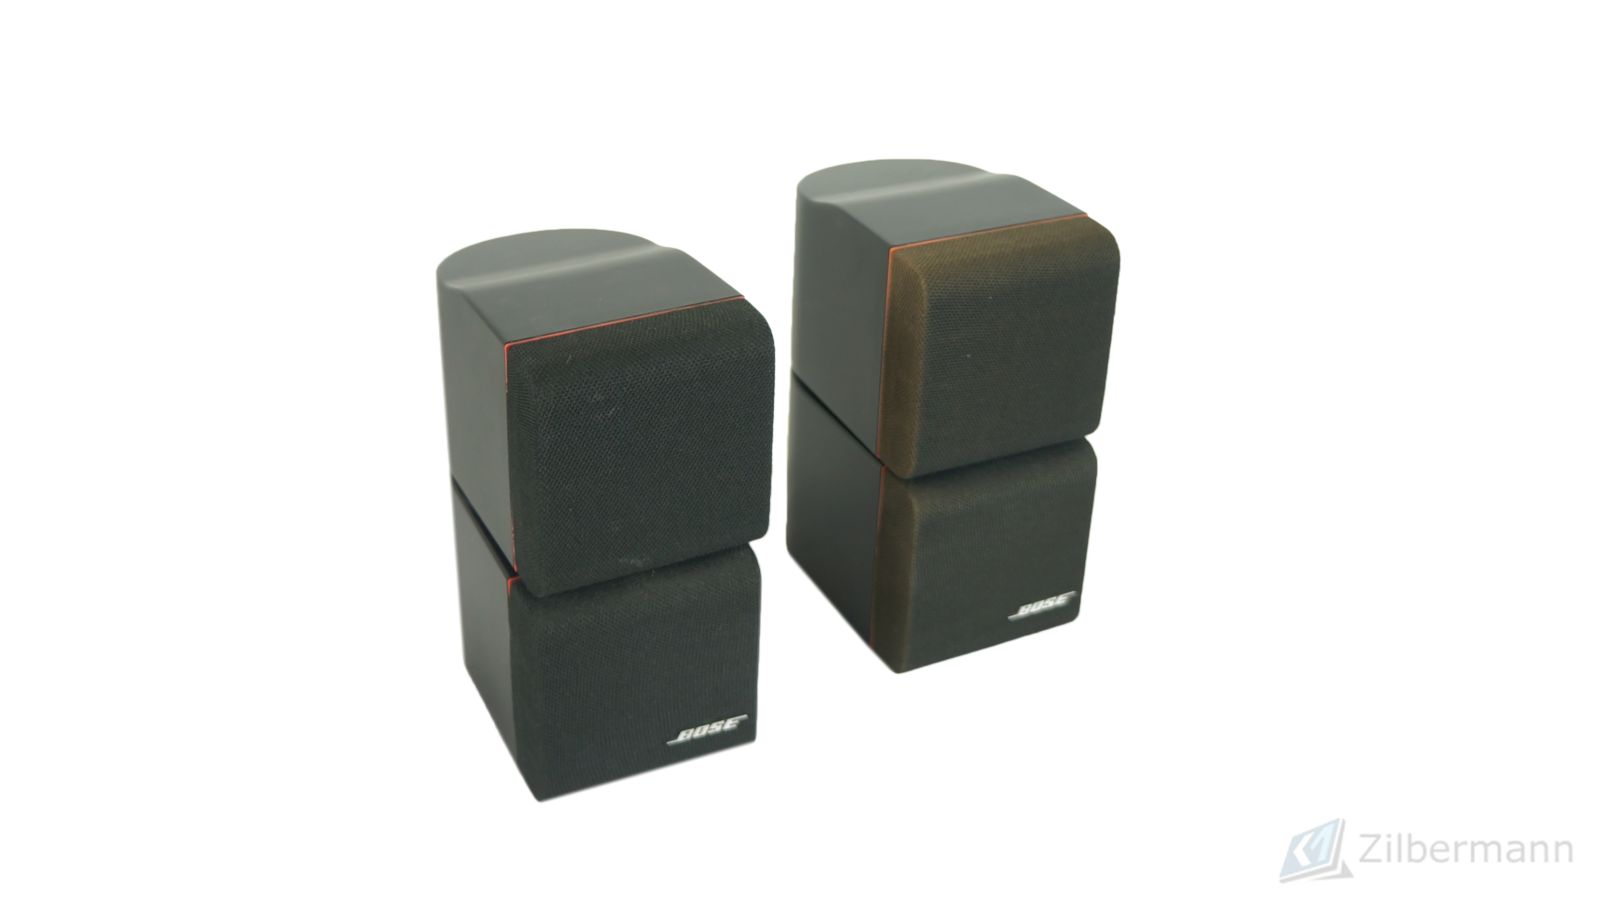 2x_Bose_Acoustimass_Doppelcubes_Series_II_mit_rotem_Rand